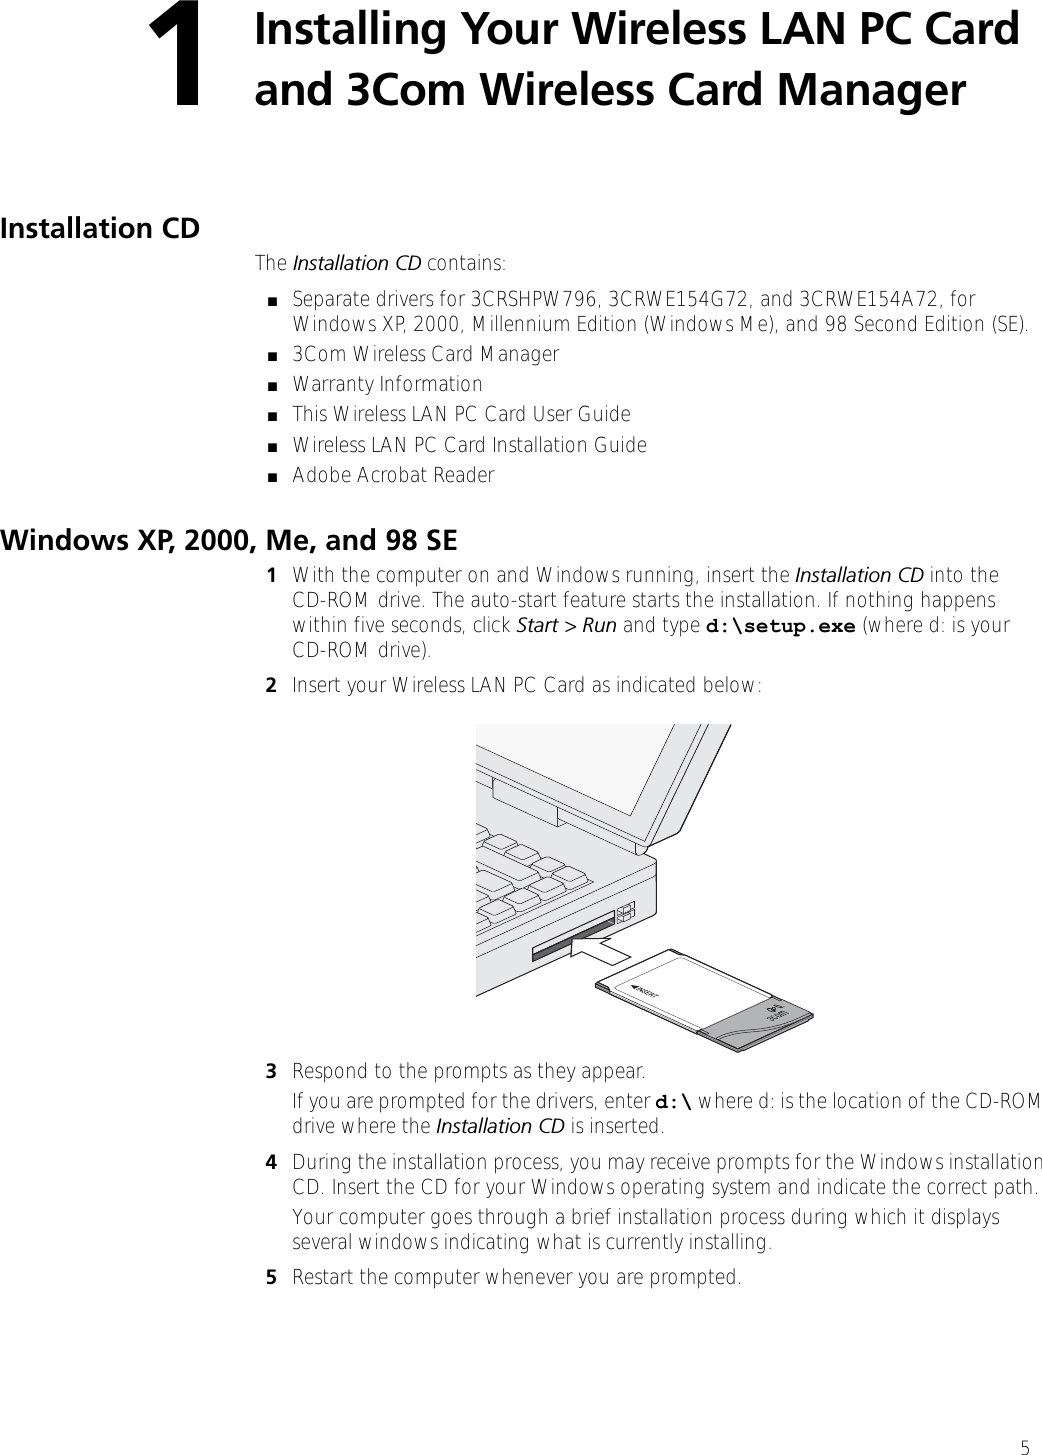 51Installing Your Wireless LAN PC Card and 3Com Wireless Card Manager Installation CD The Installation CD contains:■Separate drivers for 3CRSHPW796, 3CRWE154G72, and 3CRWE154A72, for Windows XP, 2000, Millennium Edition (Windows Me), and 98 Second Edition (SE).■3Com Wireless Card Manager■Warranty Information■This Wireless LAN PC Card User Guide■Wireless LAN PC Card Installation Guide■Adobe Acrobat ReaderWindows XP, 2000, Me, and 98 SE1With the computer on and Windows running, insert the Installation CD into theCD-ROM drive. The auto-start feature starts the installation. If nothing happens within five seconds, click Start &gt; Run and type d:\setup.exe (where d: is your CD-ROM drive).2Insert your Wireless LAN PC Card as indicated below:3Respond to the prompts as they appear.If you are prompted for the drivers, enter d:\ where d: is the location of the CD-ROM drive where the Installation CD is inserted. 4During the installation process, you may receive prompts for the Windows installation CD. Insert the CD for your Windows operating system and indicate the correct path.Your computer goes through a brief installation process during which it displays several windows indicating what is currently installing.5Restart the computer whenever you are prompted.